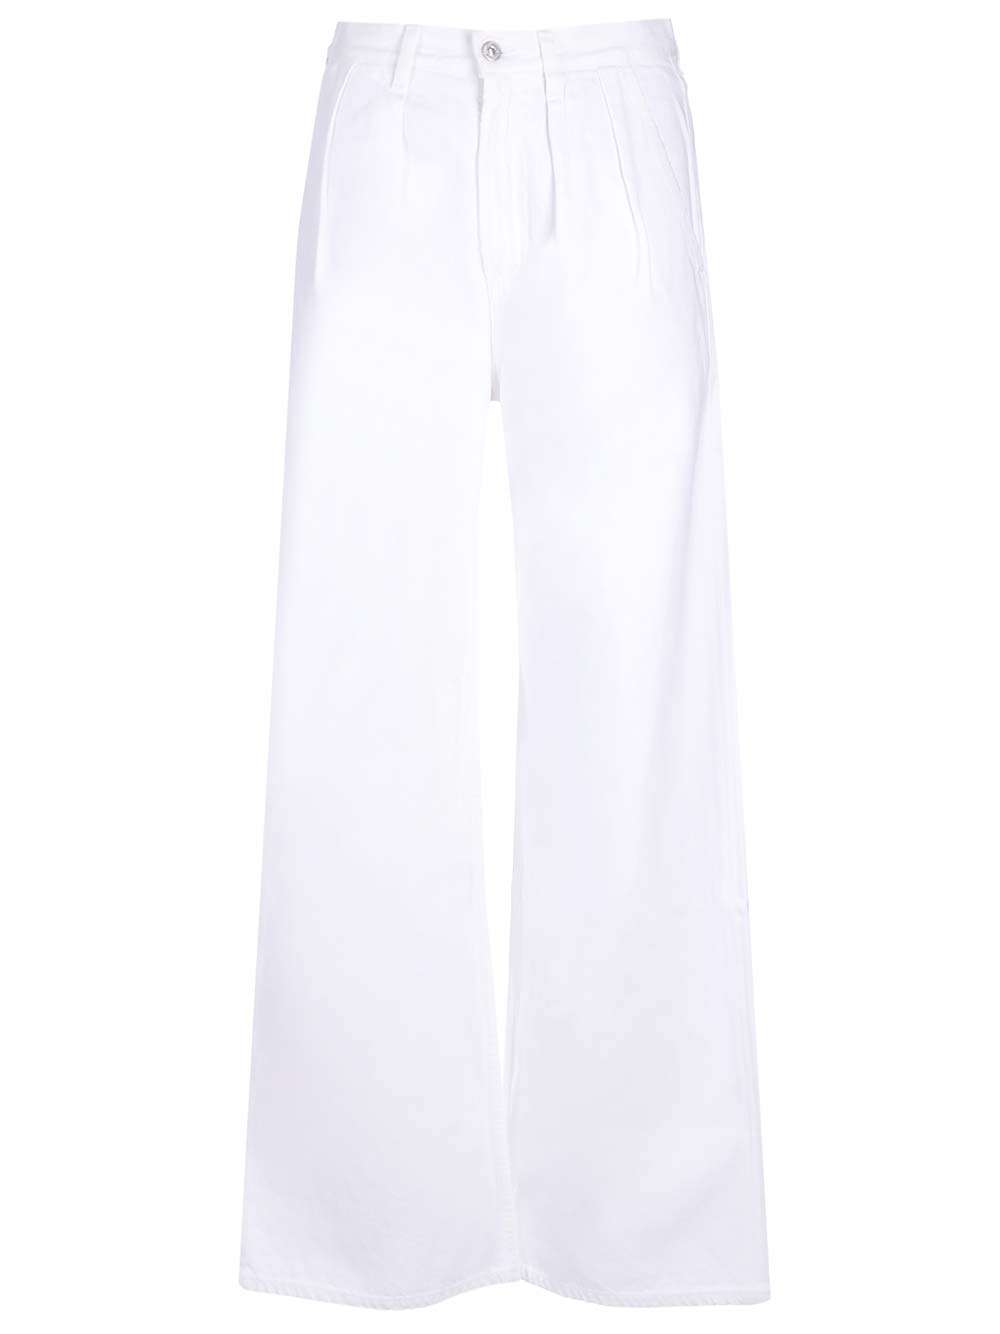 CITIZENS OF HUMANITY MARITZY WIDE JEANS TROUSERS